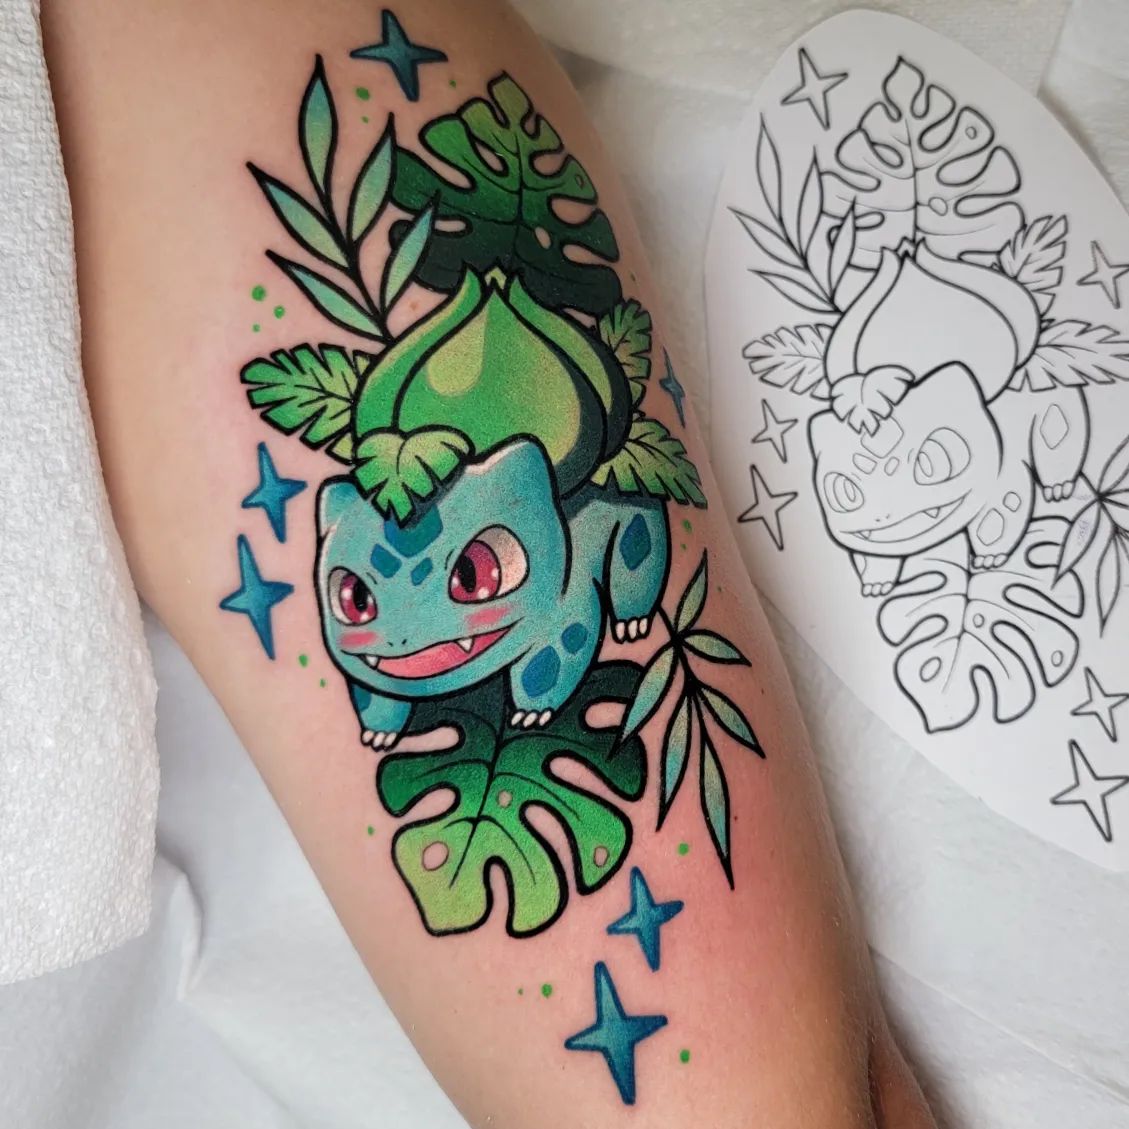 Bulbasaur is one of the original 151 Pokemon. It's a grass type and its Japanese name is 